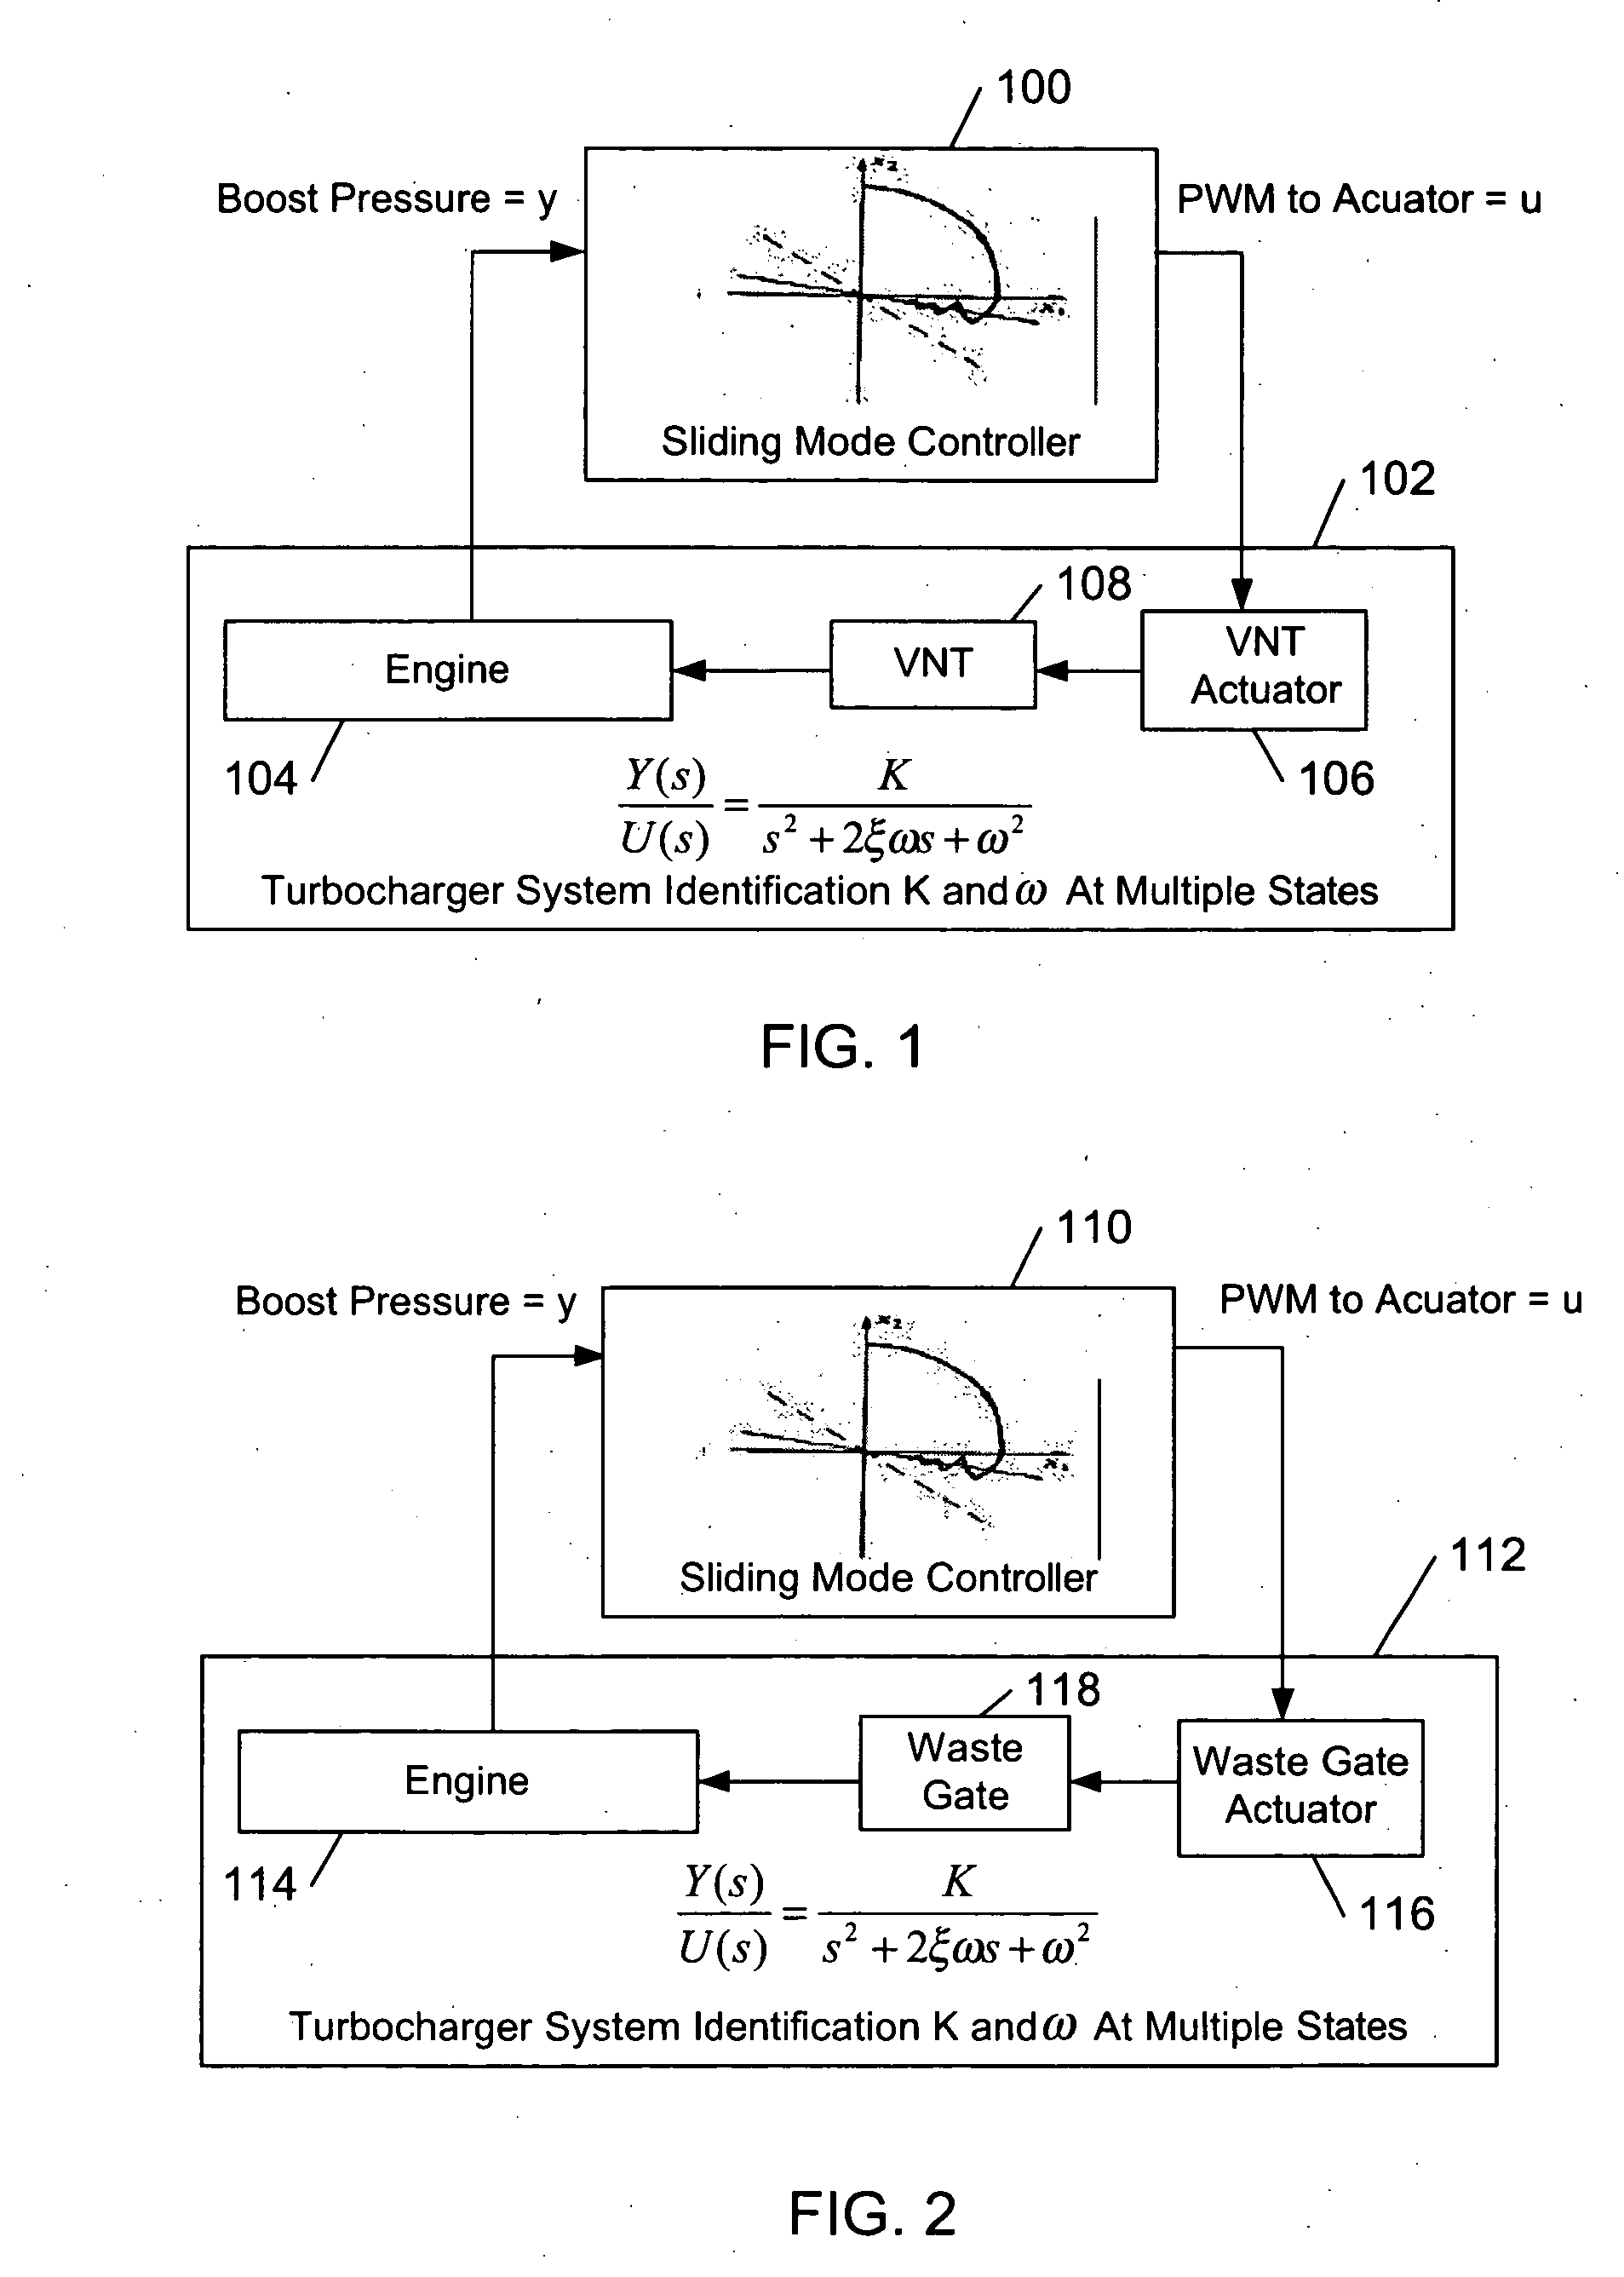 Method and system for sliding mode control of a turbocharger